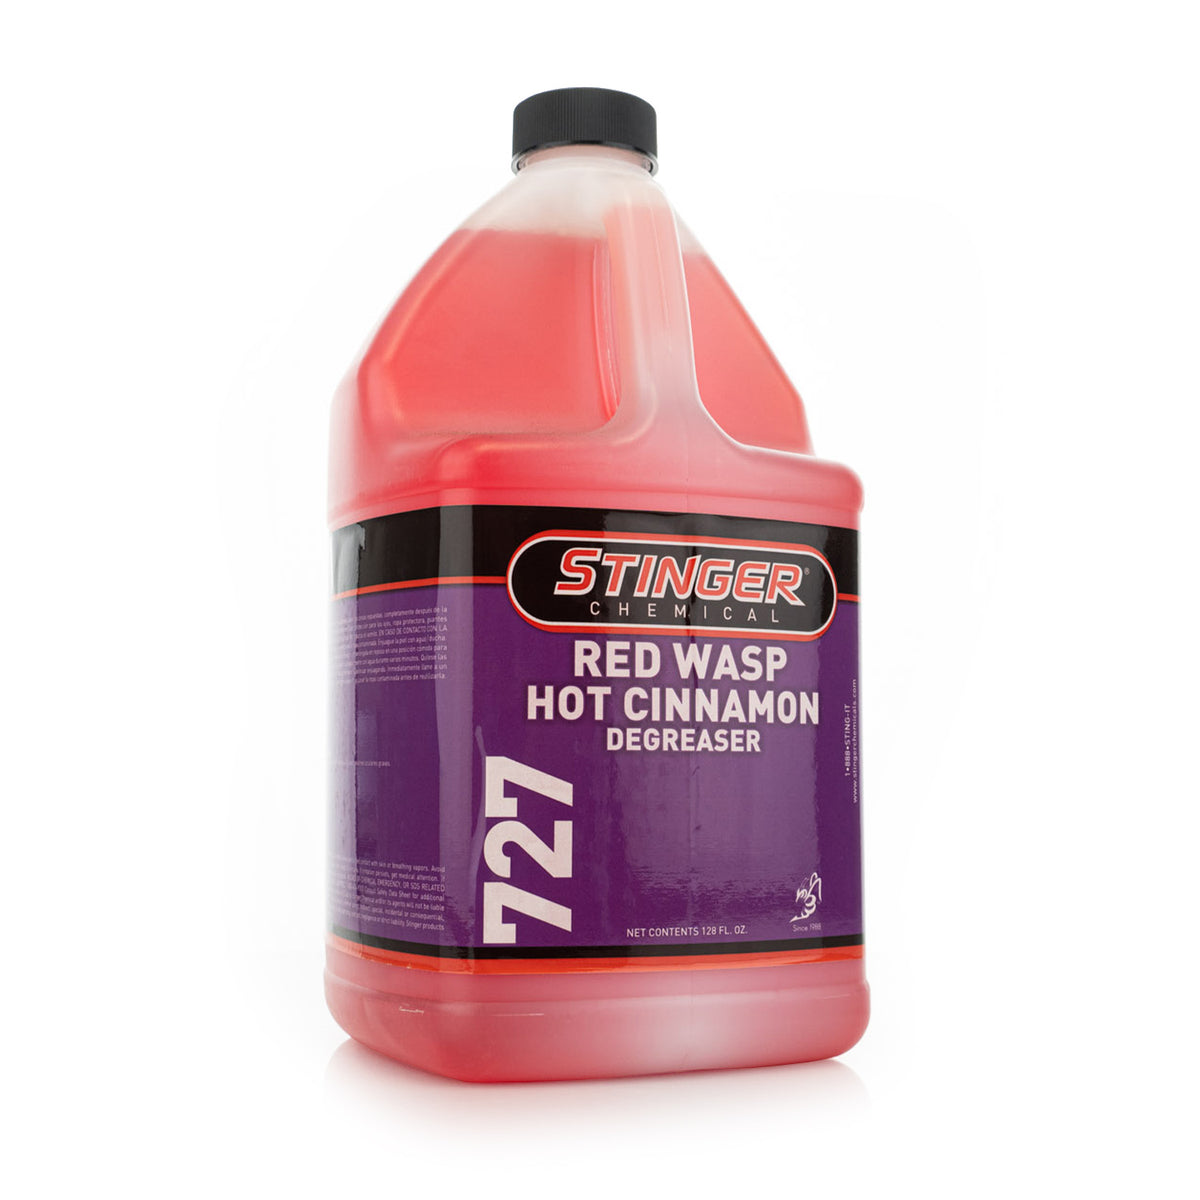 Red Degreaser – midsouthshowcar